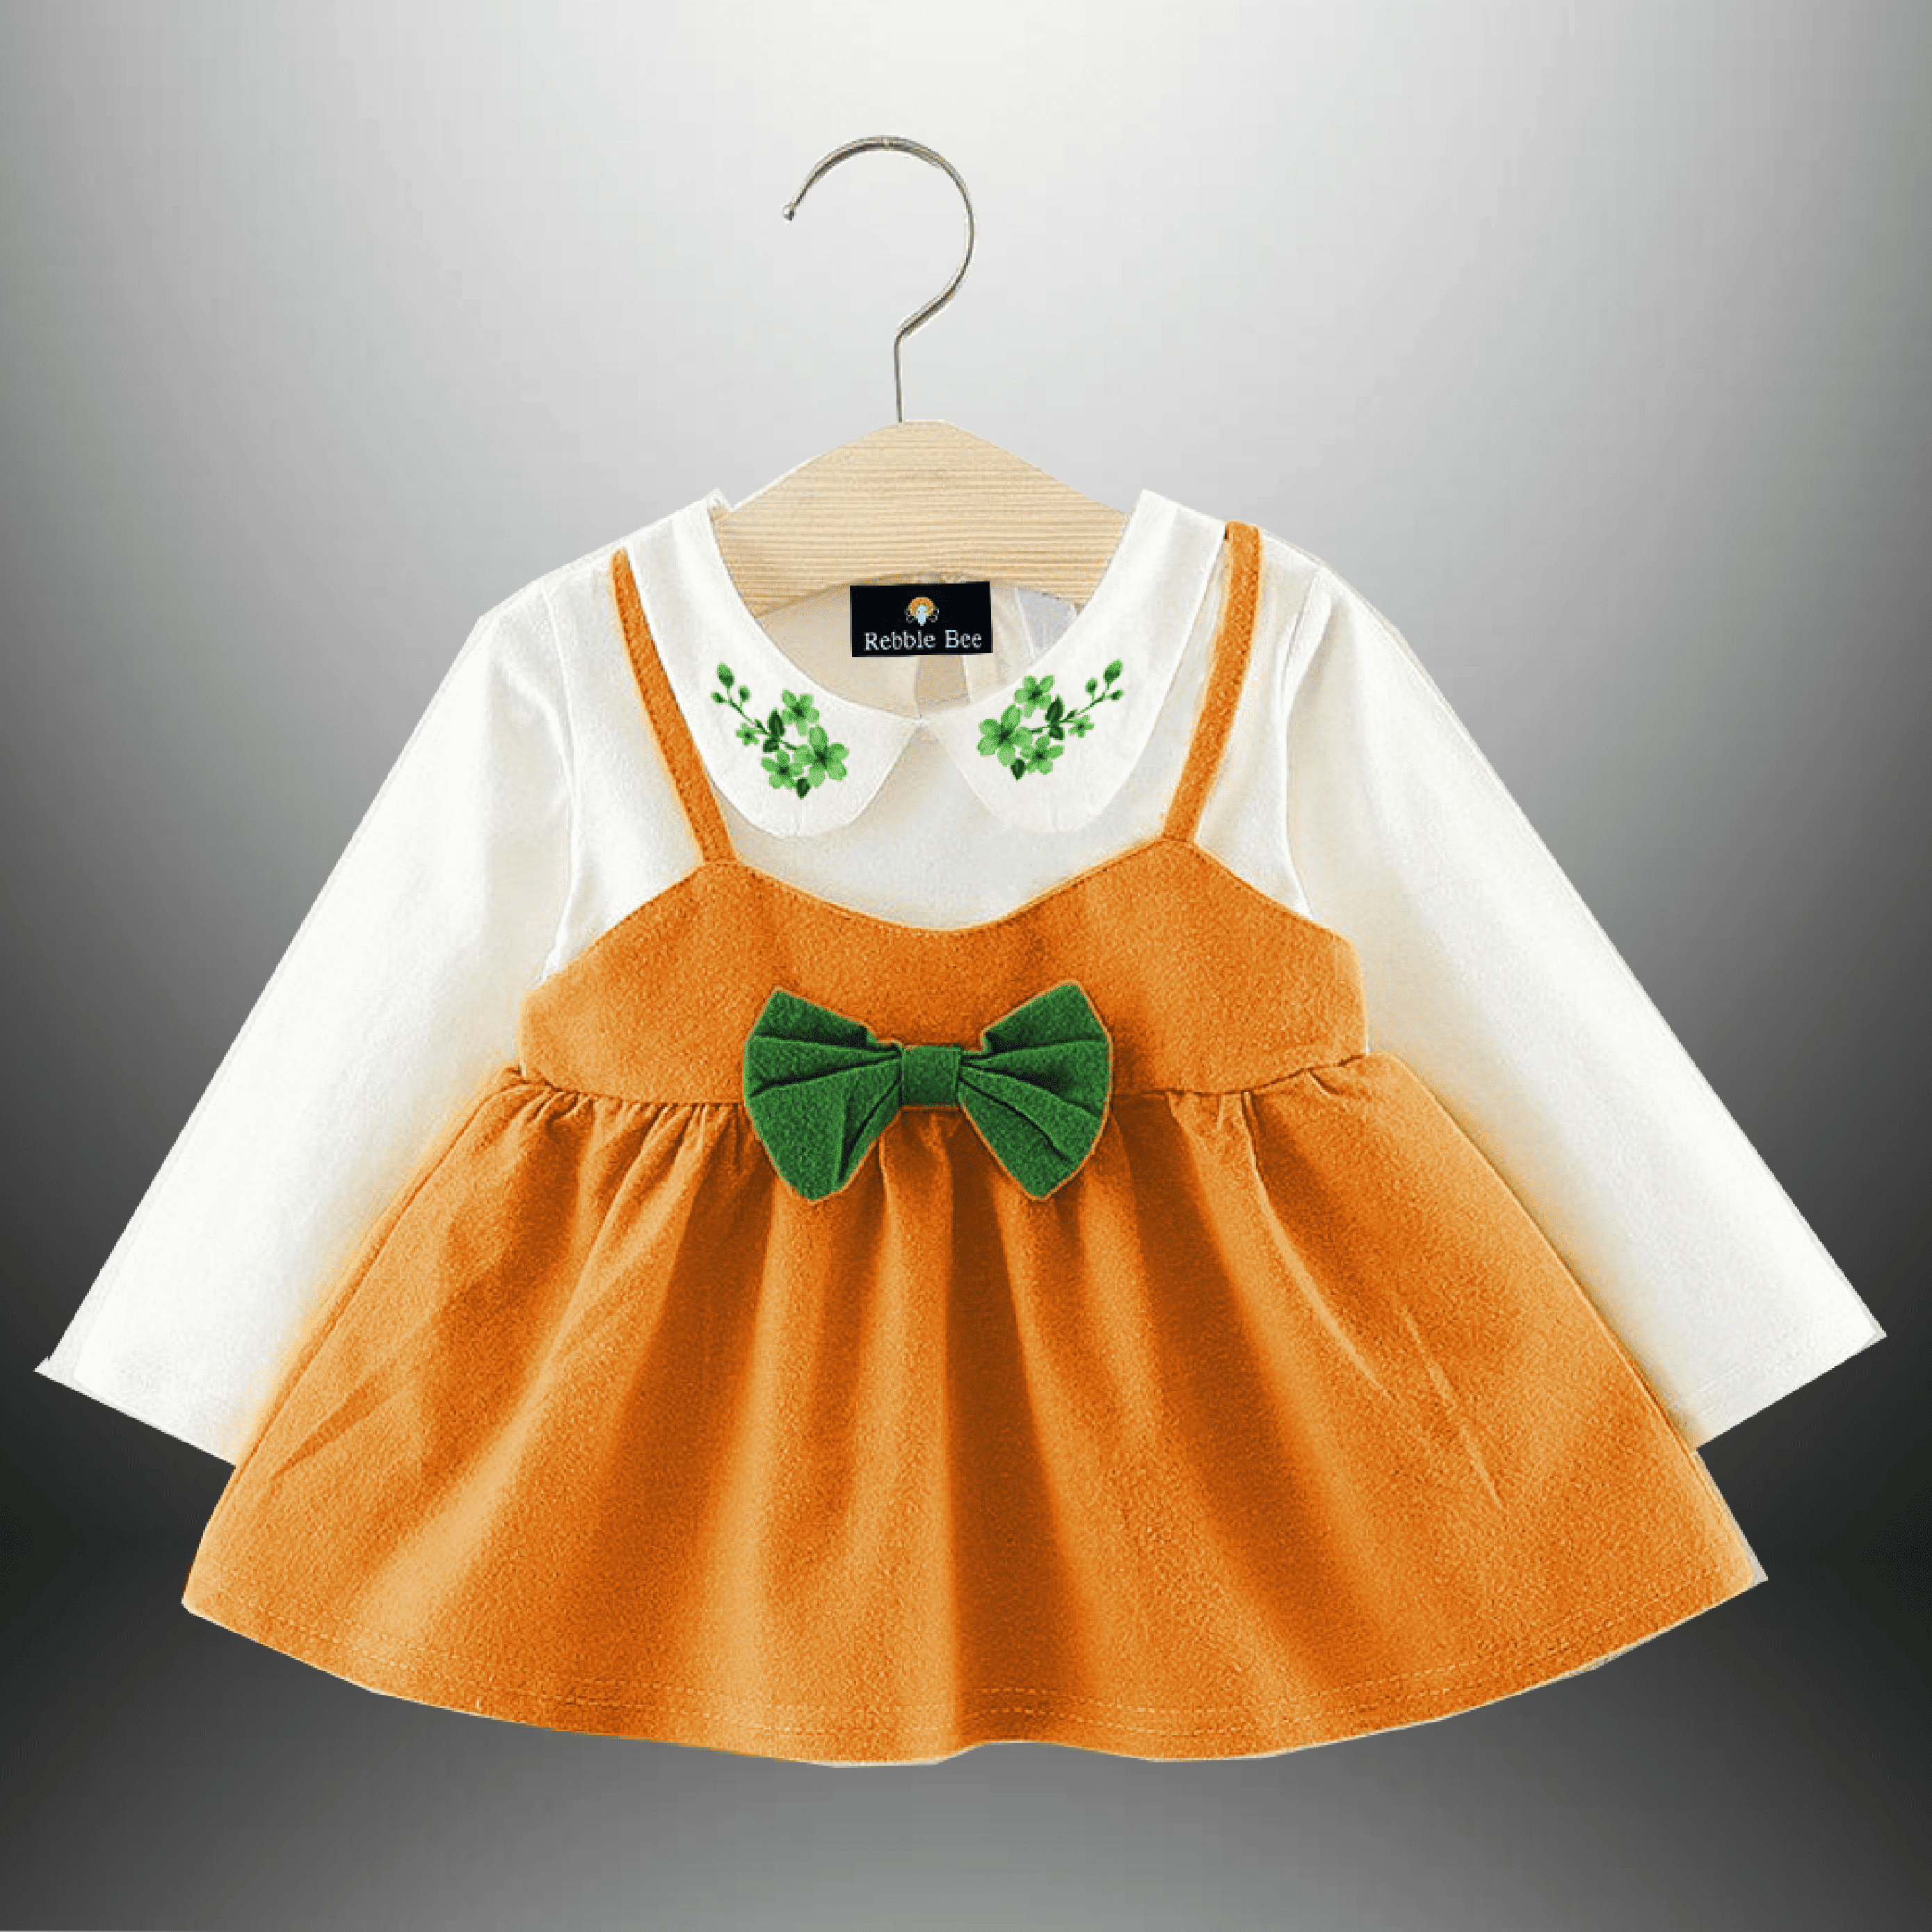 Girls White T-shirt with Orange Pinafore Dress with a Cute Bow-RKFCW300